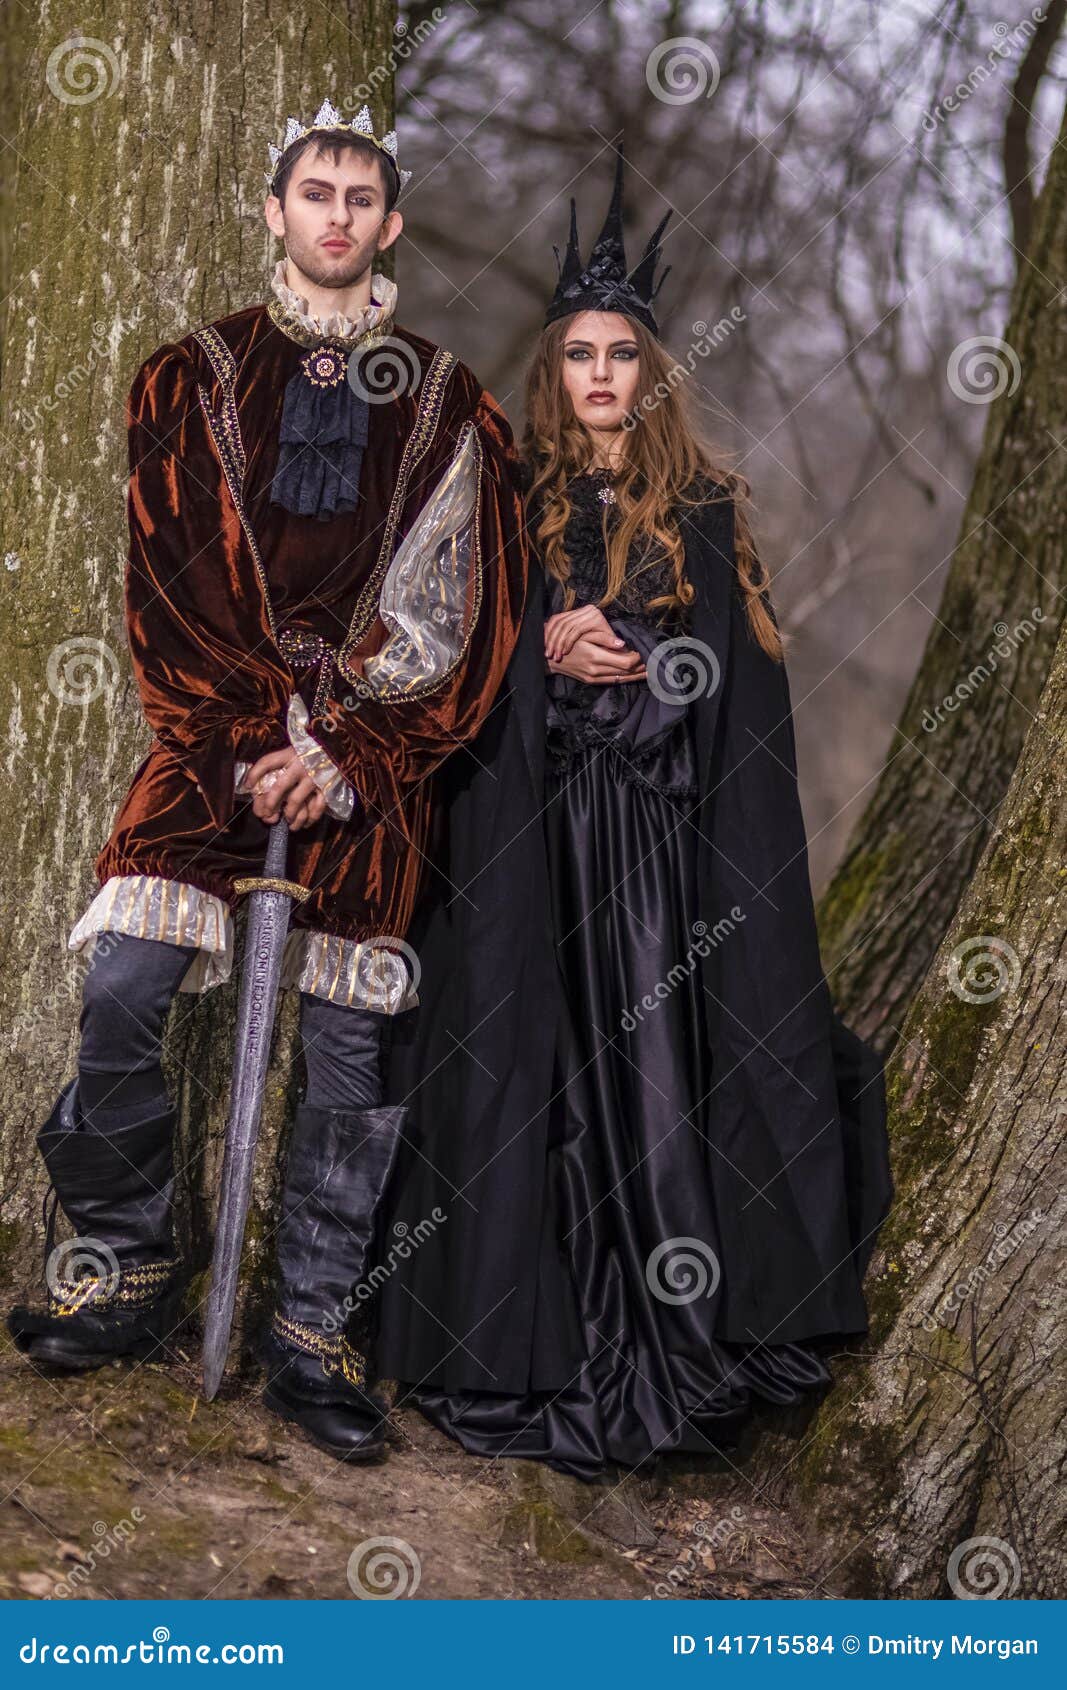 Cosplay Ideas.Caucasian Couple As King and Queen in Fur Medieval ...